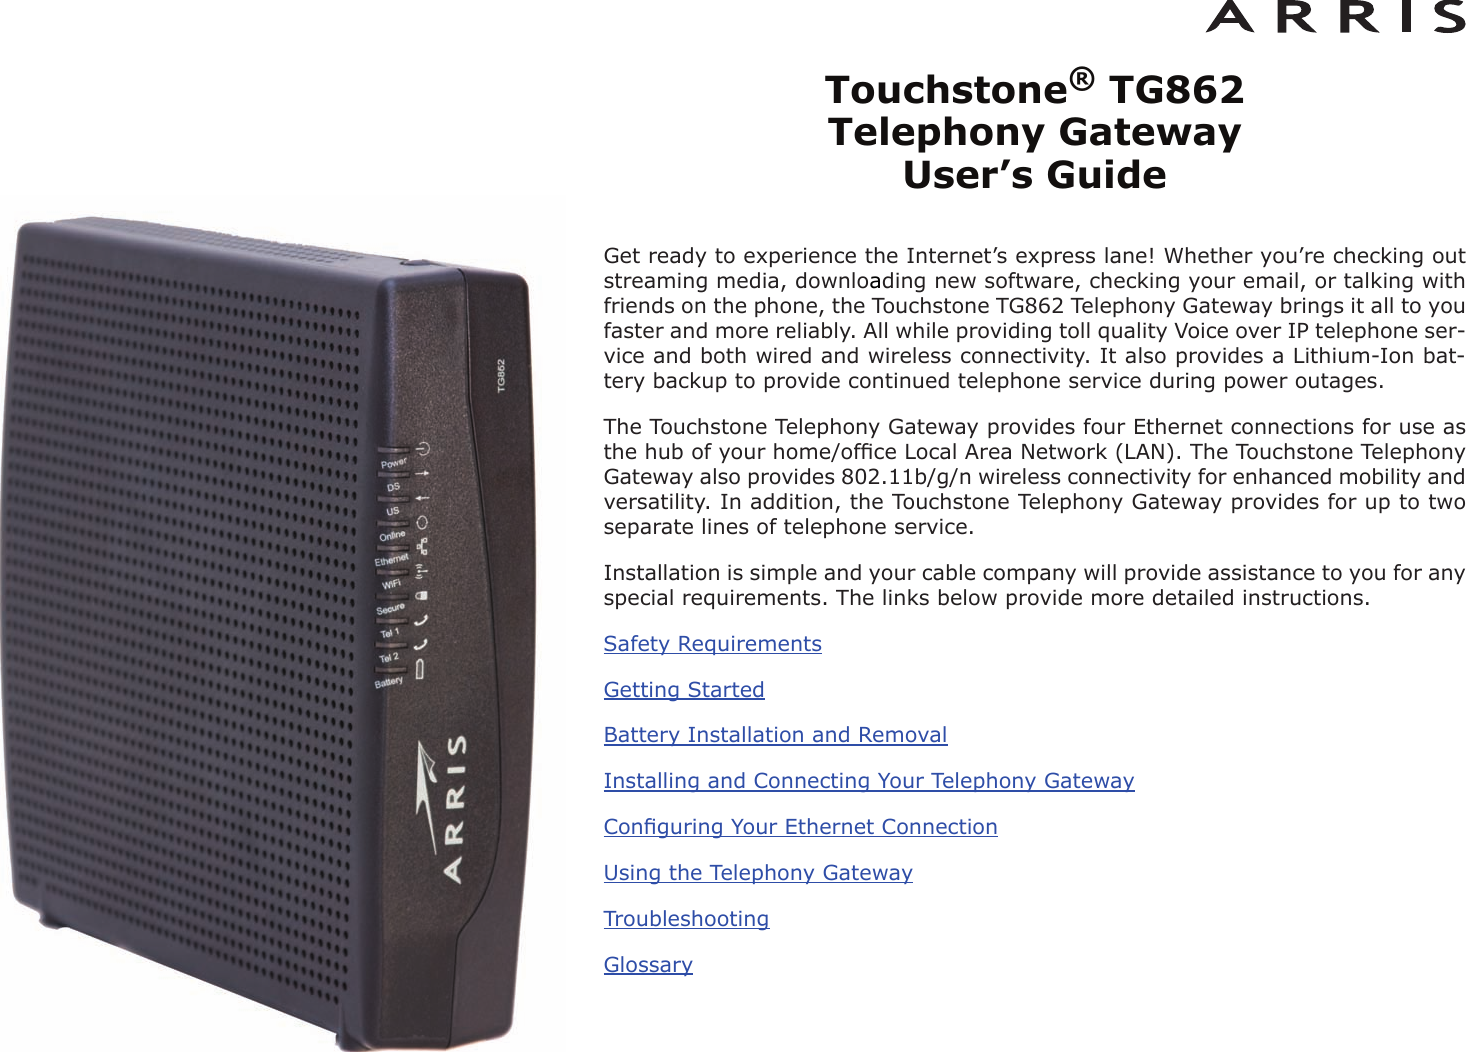 Touchstone®TG862 Telephony Gateway User’s GuideGet ready to experience the Internet’s express lane! Whether you’re checking outstreaming media, downloading new software, checking your email, or talking withfriends on the phone, the Touchstone TG862 Telephony Gateway brings it all to youfaster and more reliably. All while providing toll quality Voice over IP telephone ser -vice and both wired and wireless connectivity. It also provides a Lithi um-Ion bat-tery backup to provide continued telephone service during power outages.The Touchstone Telephony Gateway provides four Ethernet connections for use asthe hub of your home/ofﬁce Local Area Network (LAN). The Touchstone TelephonyGateway also provides 802.11b/g/n wireless connectivity for enhanced mobility andversatility. In addition, the Touchstone Telephony Gateway provides for up to twoseparate lines of telephone service.Installation is simple and your cable company will provide assistance to you for anyspecial requirements. The links below provide more detailed instructions.Safety RequirementsGetting StartedBattery Installation and RemovalInstalling and Connecting Your Telephony GatewayConﬁguring Your Ethernet ConnectionUsing the Telephony GatewayTroubleshootingGlossary